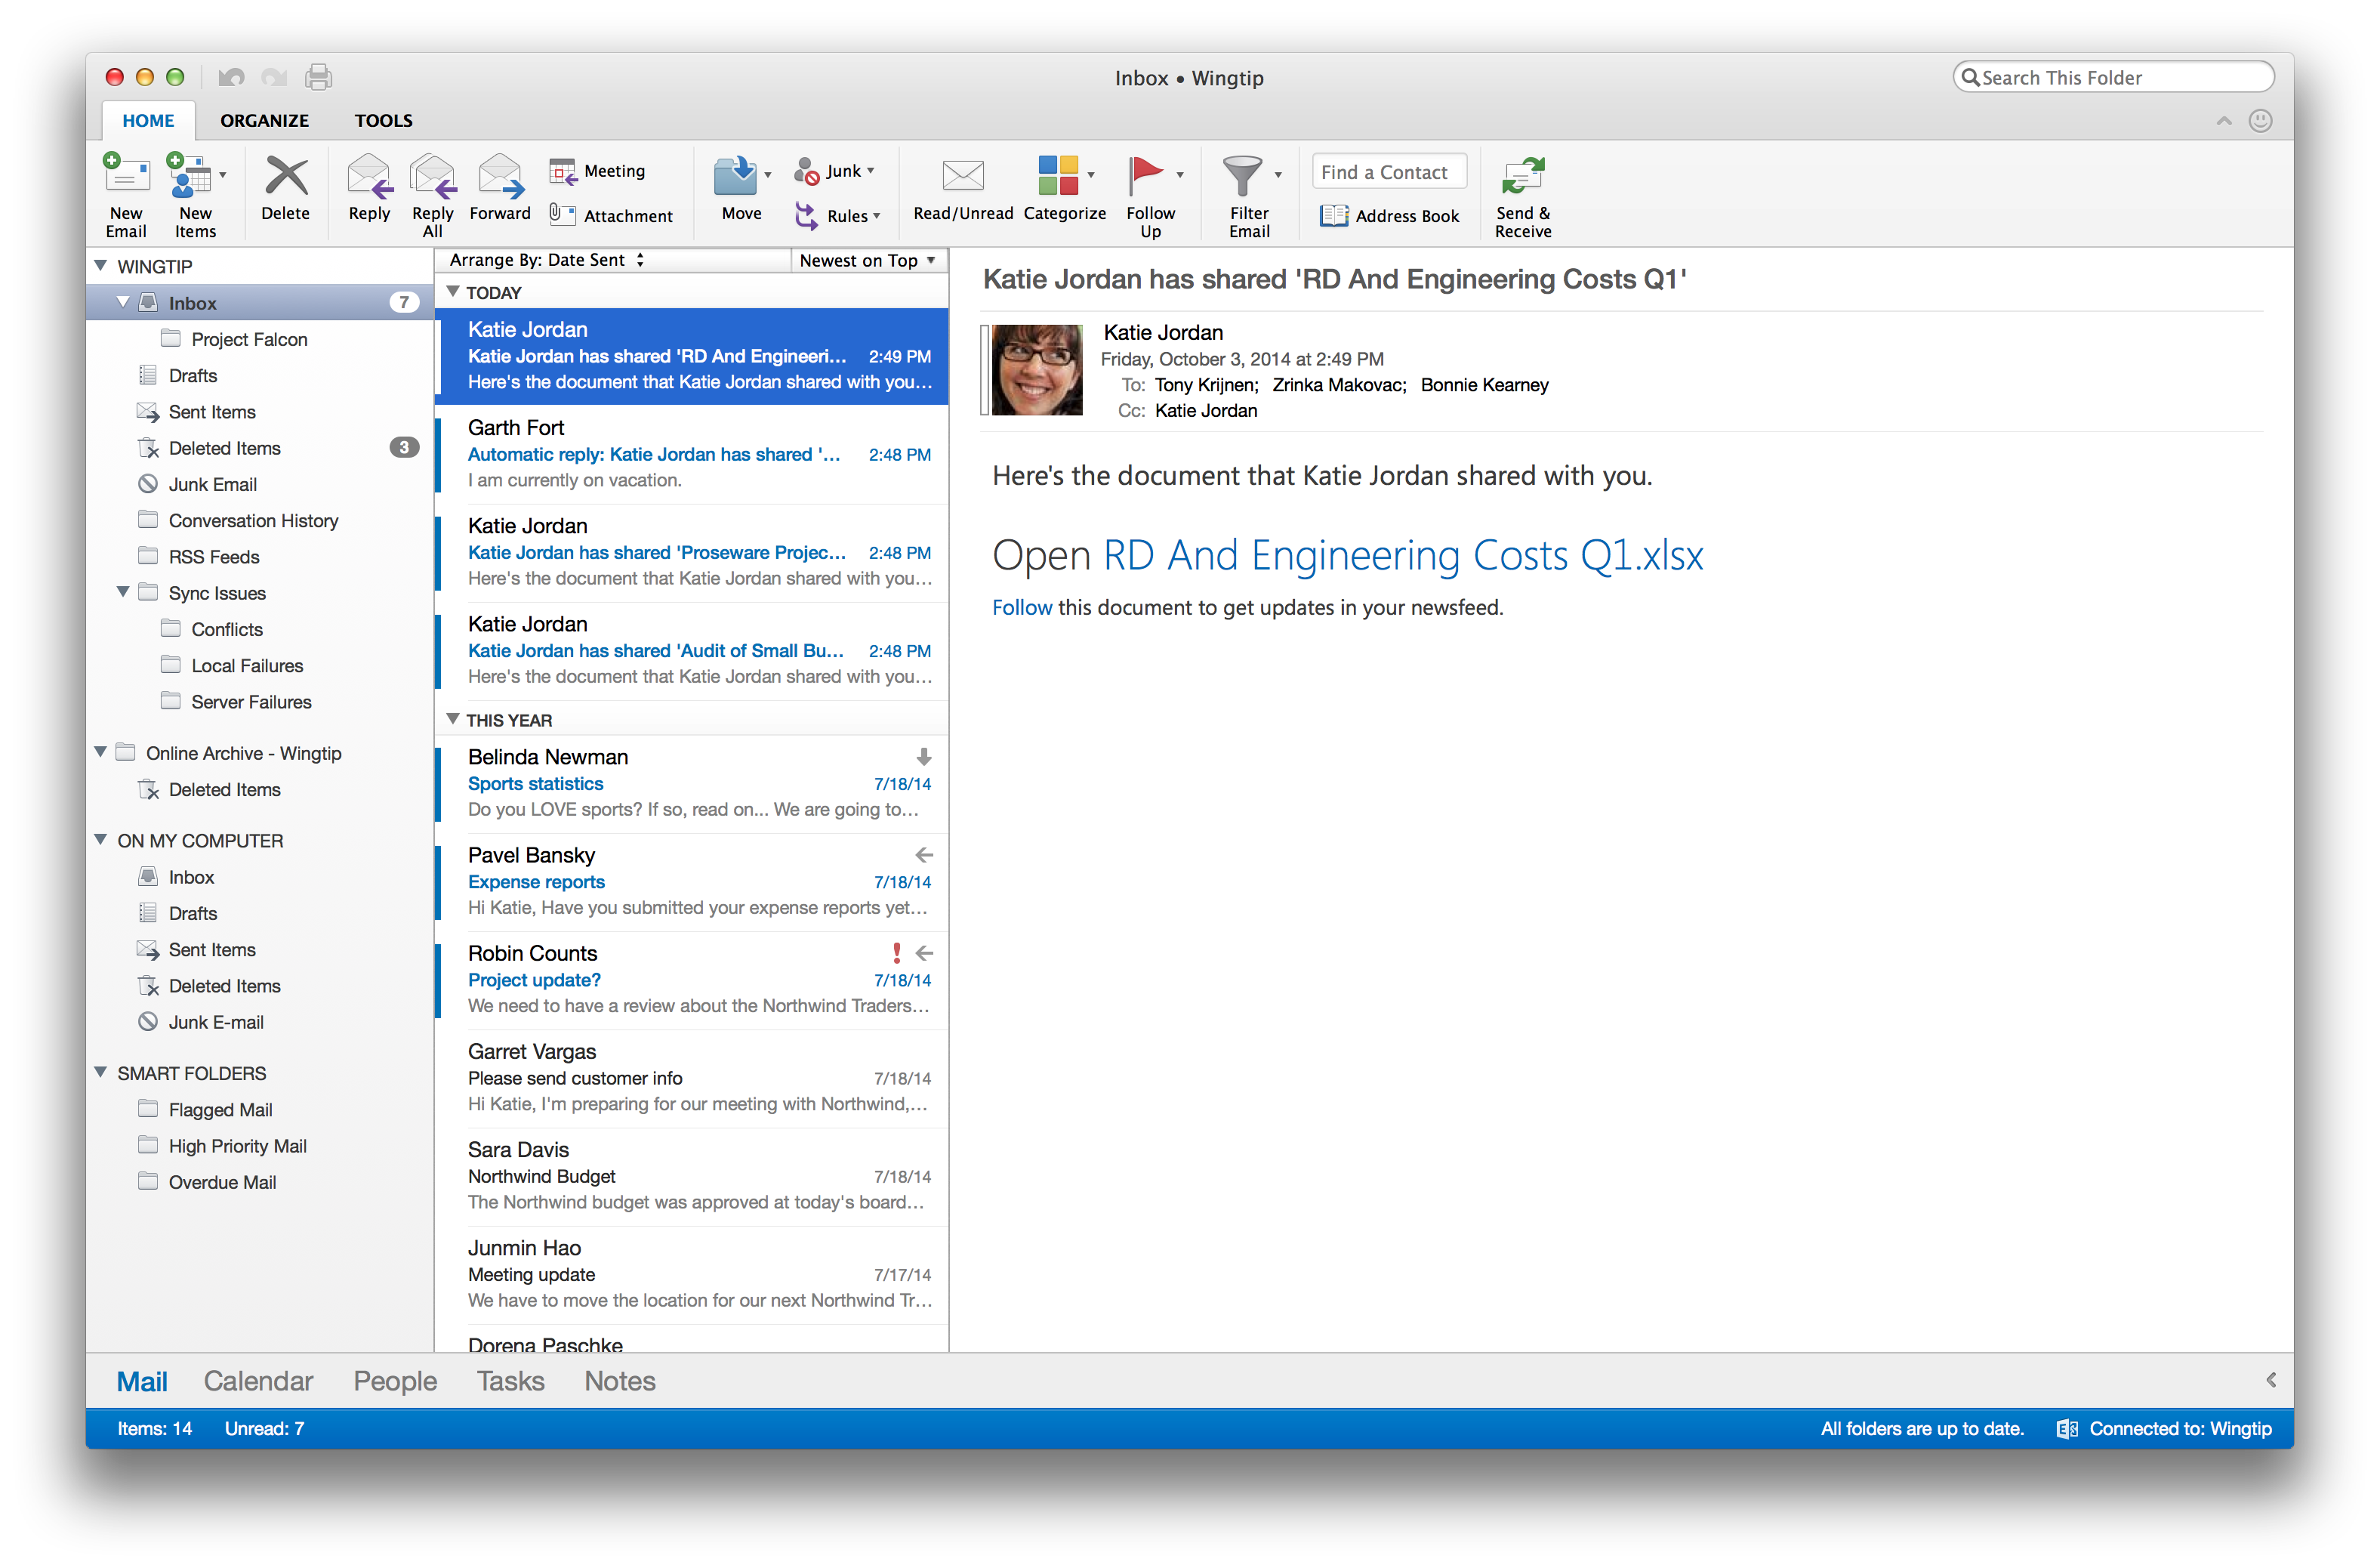 office 365 for mac cheapest